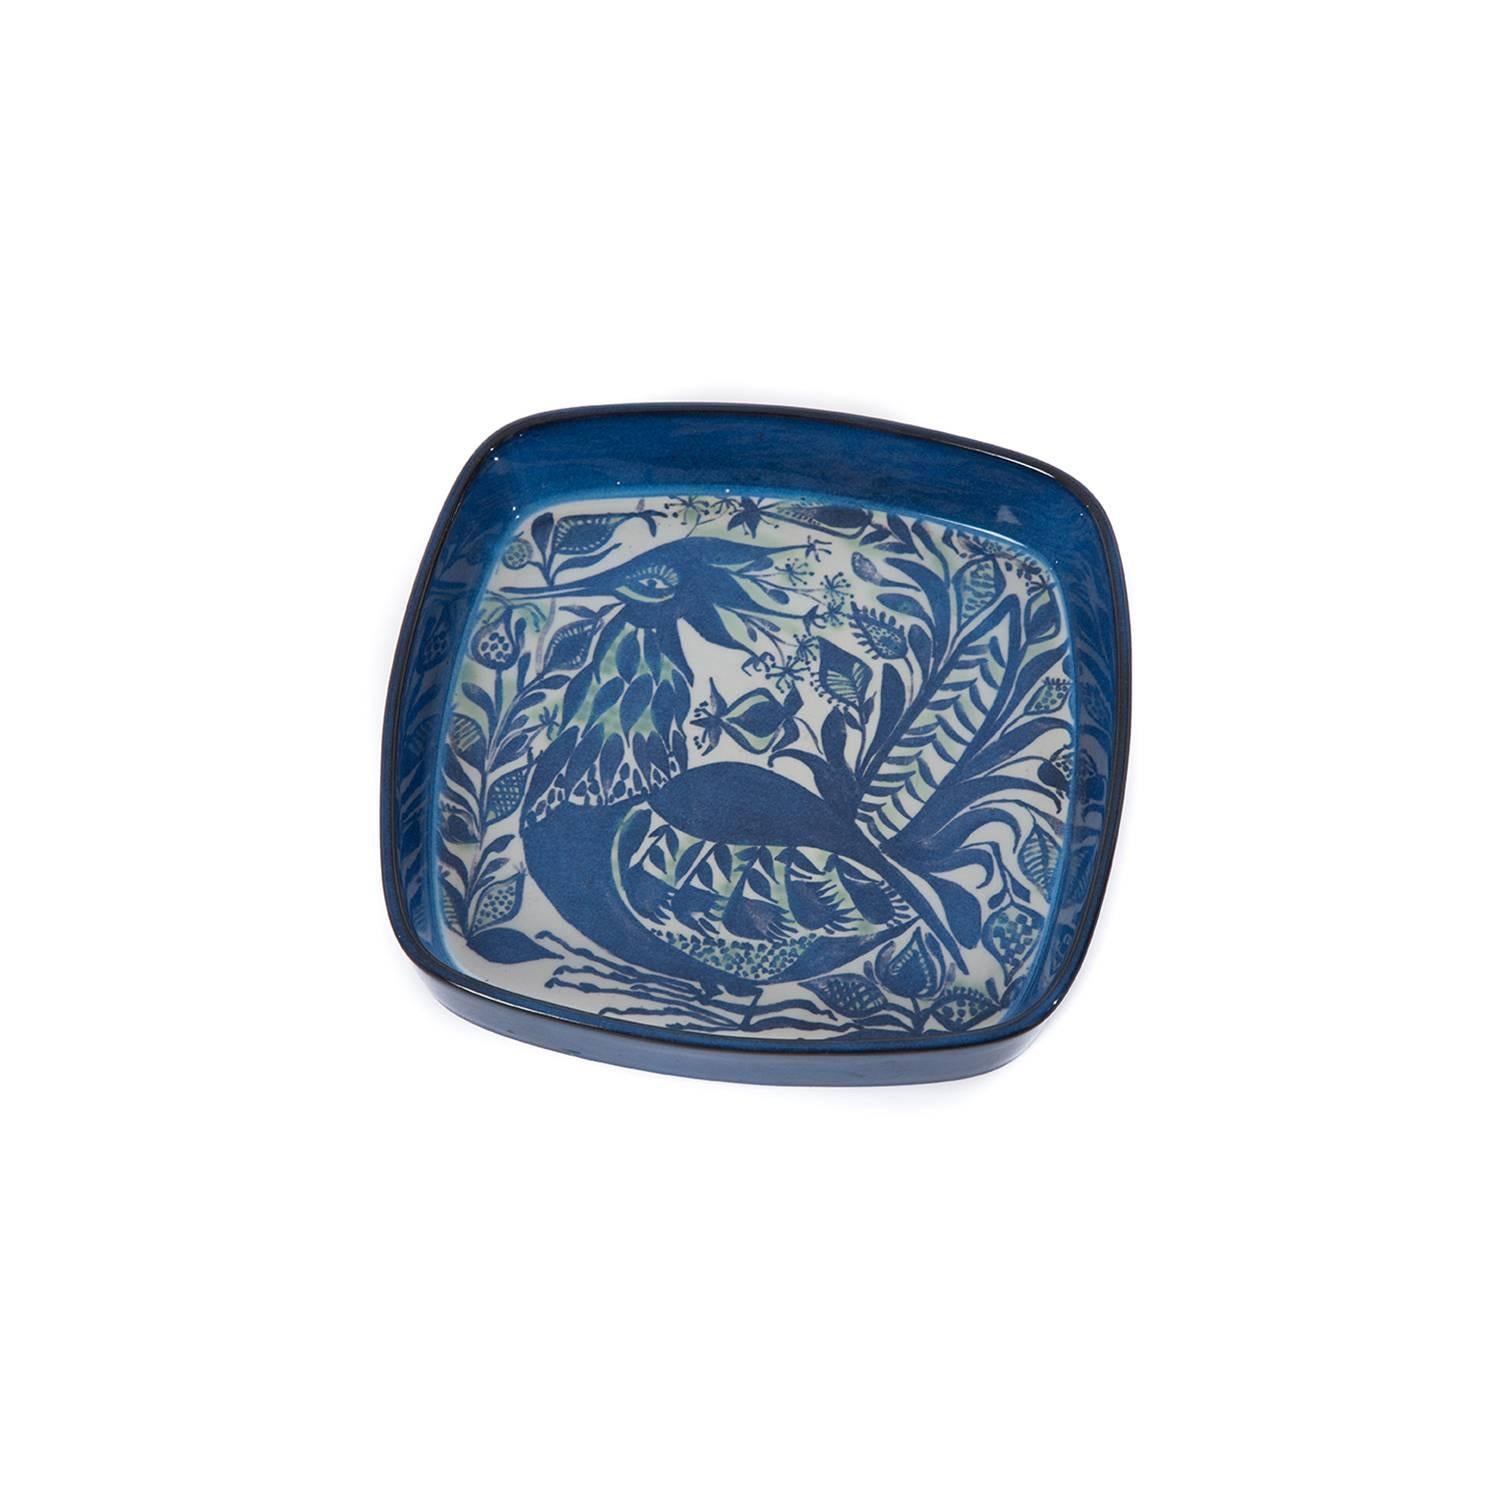 This lovely piece of faience by Royal Copenhagen boasts a hand-painted peacock motif in traditional Danish blue by Marianne Johnson. Perhaps inspired by Tivoli Gardens.